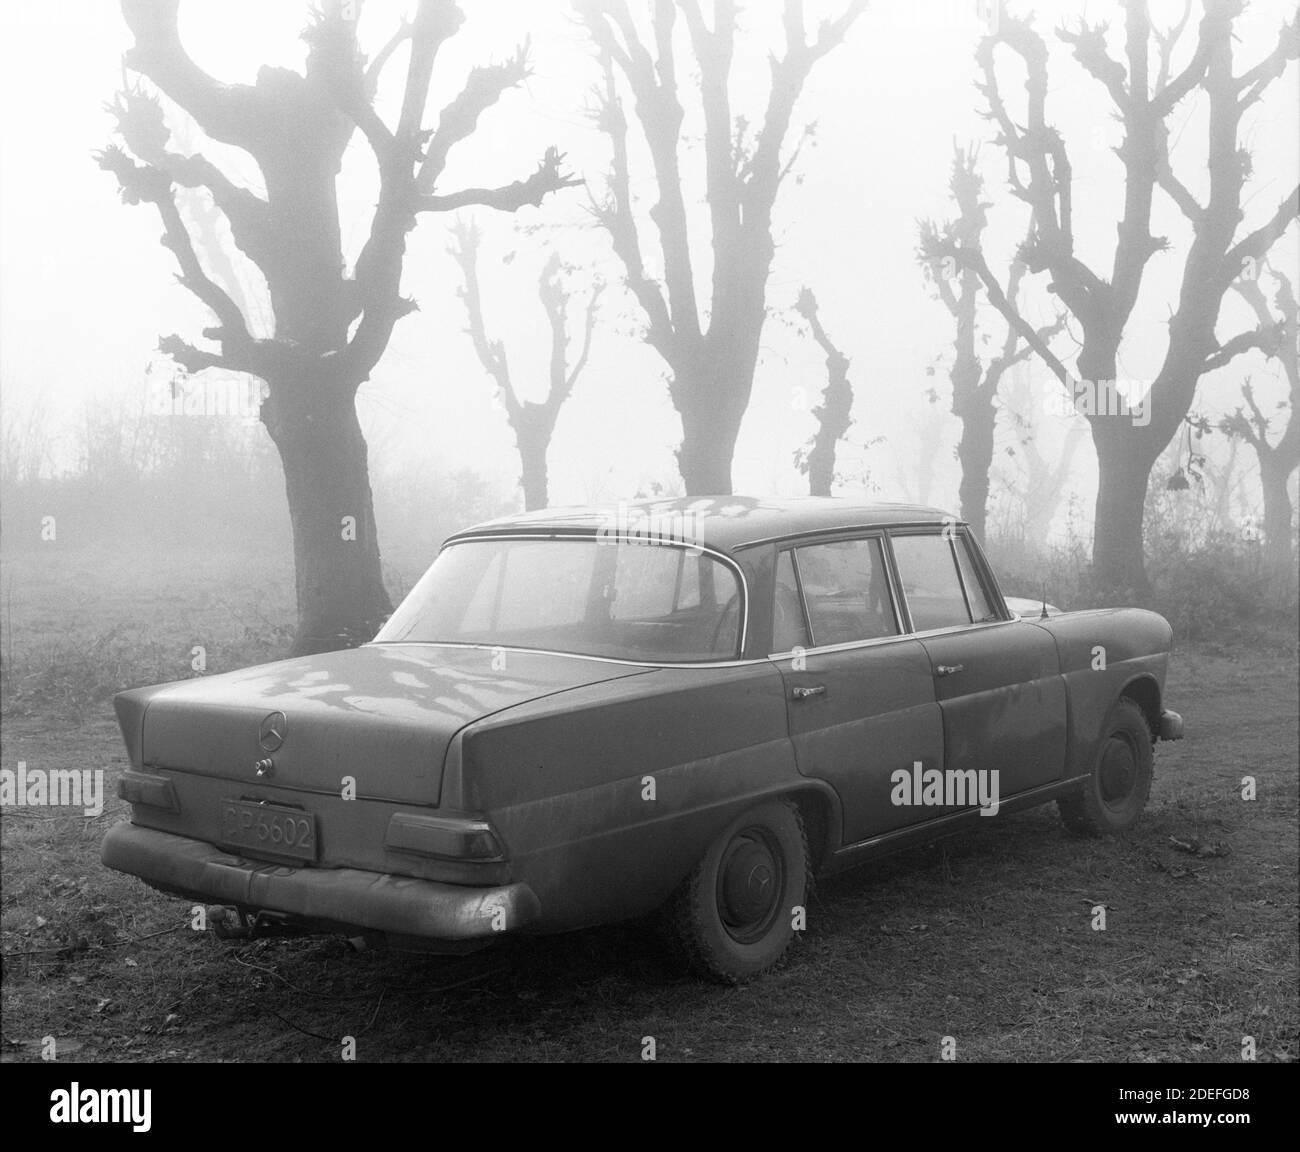 Old car parked in the misty forest. Stock Photo